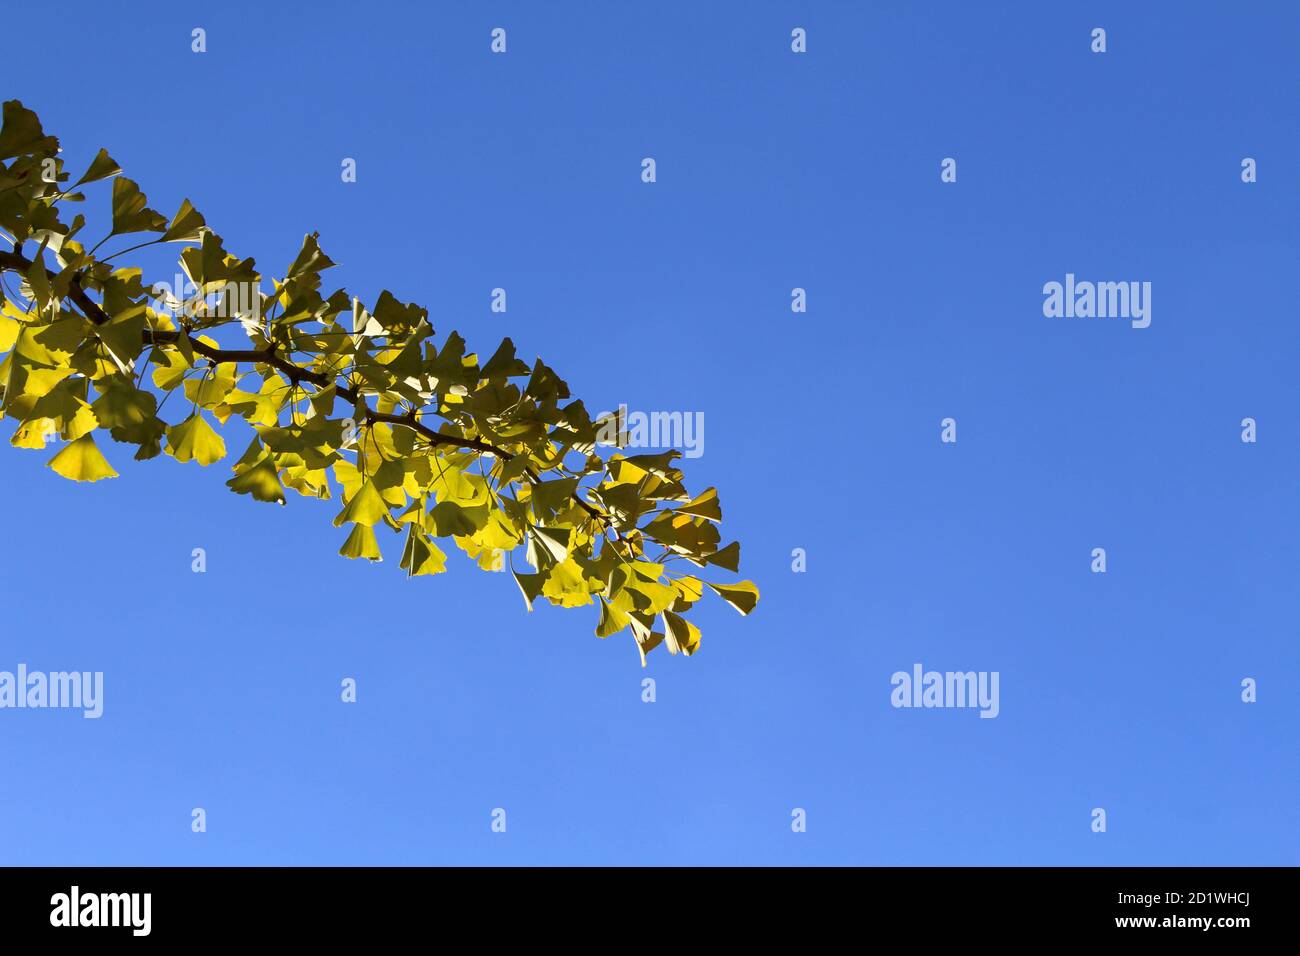 Branches and yellow ginkgo leaves during spring season in Japan. Stock Photo